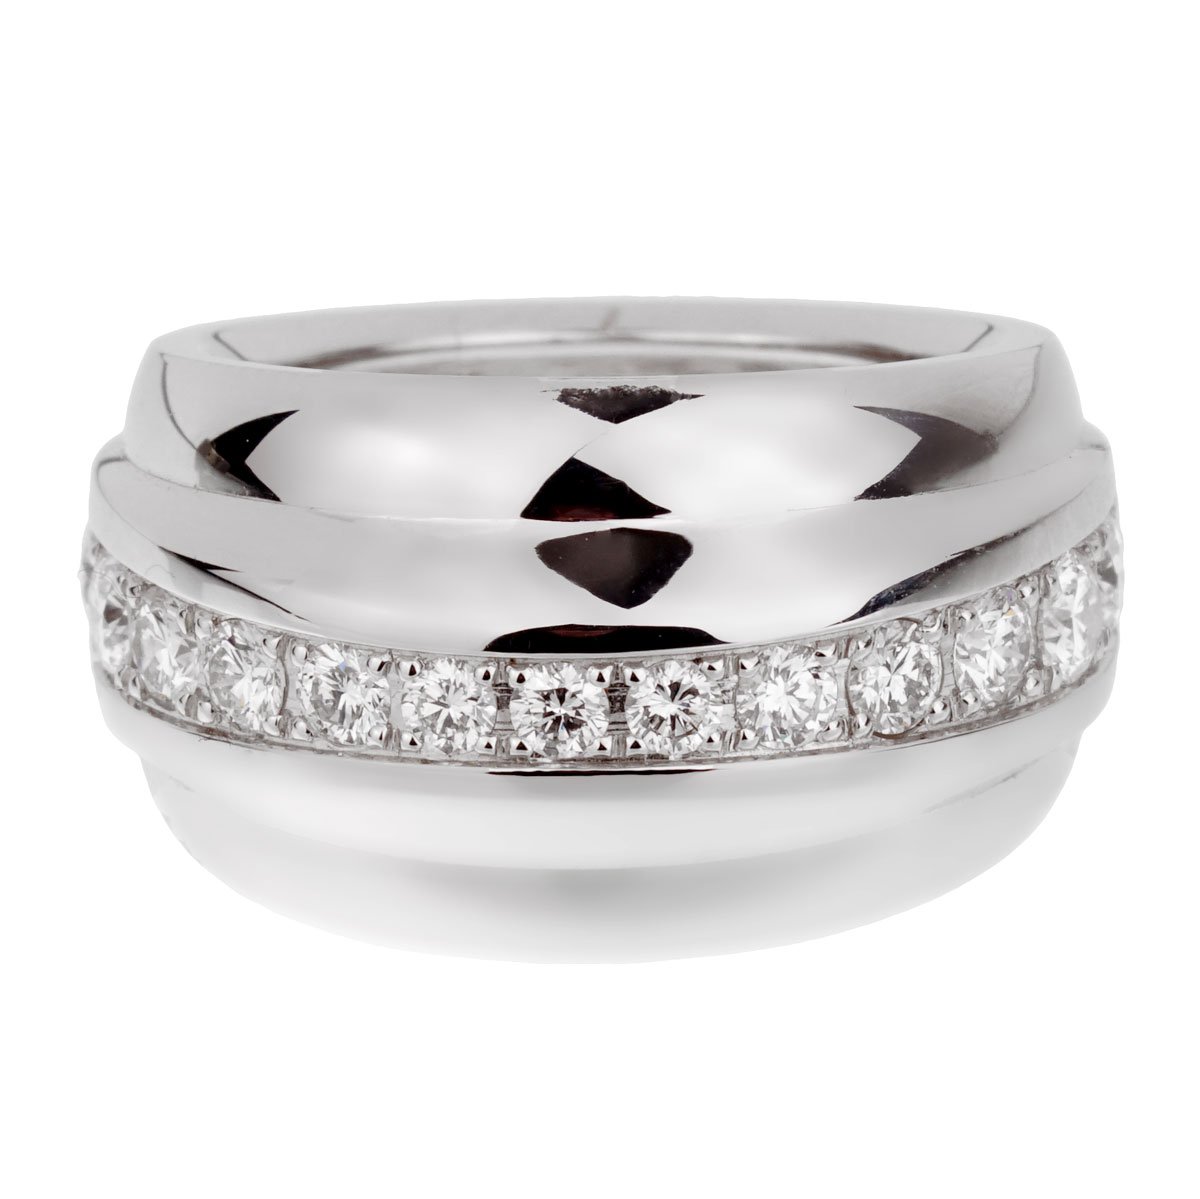 Chopard 18kt White Gold Ice Cube Diamond Ring - Fairmined White Gold